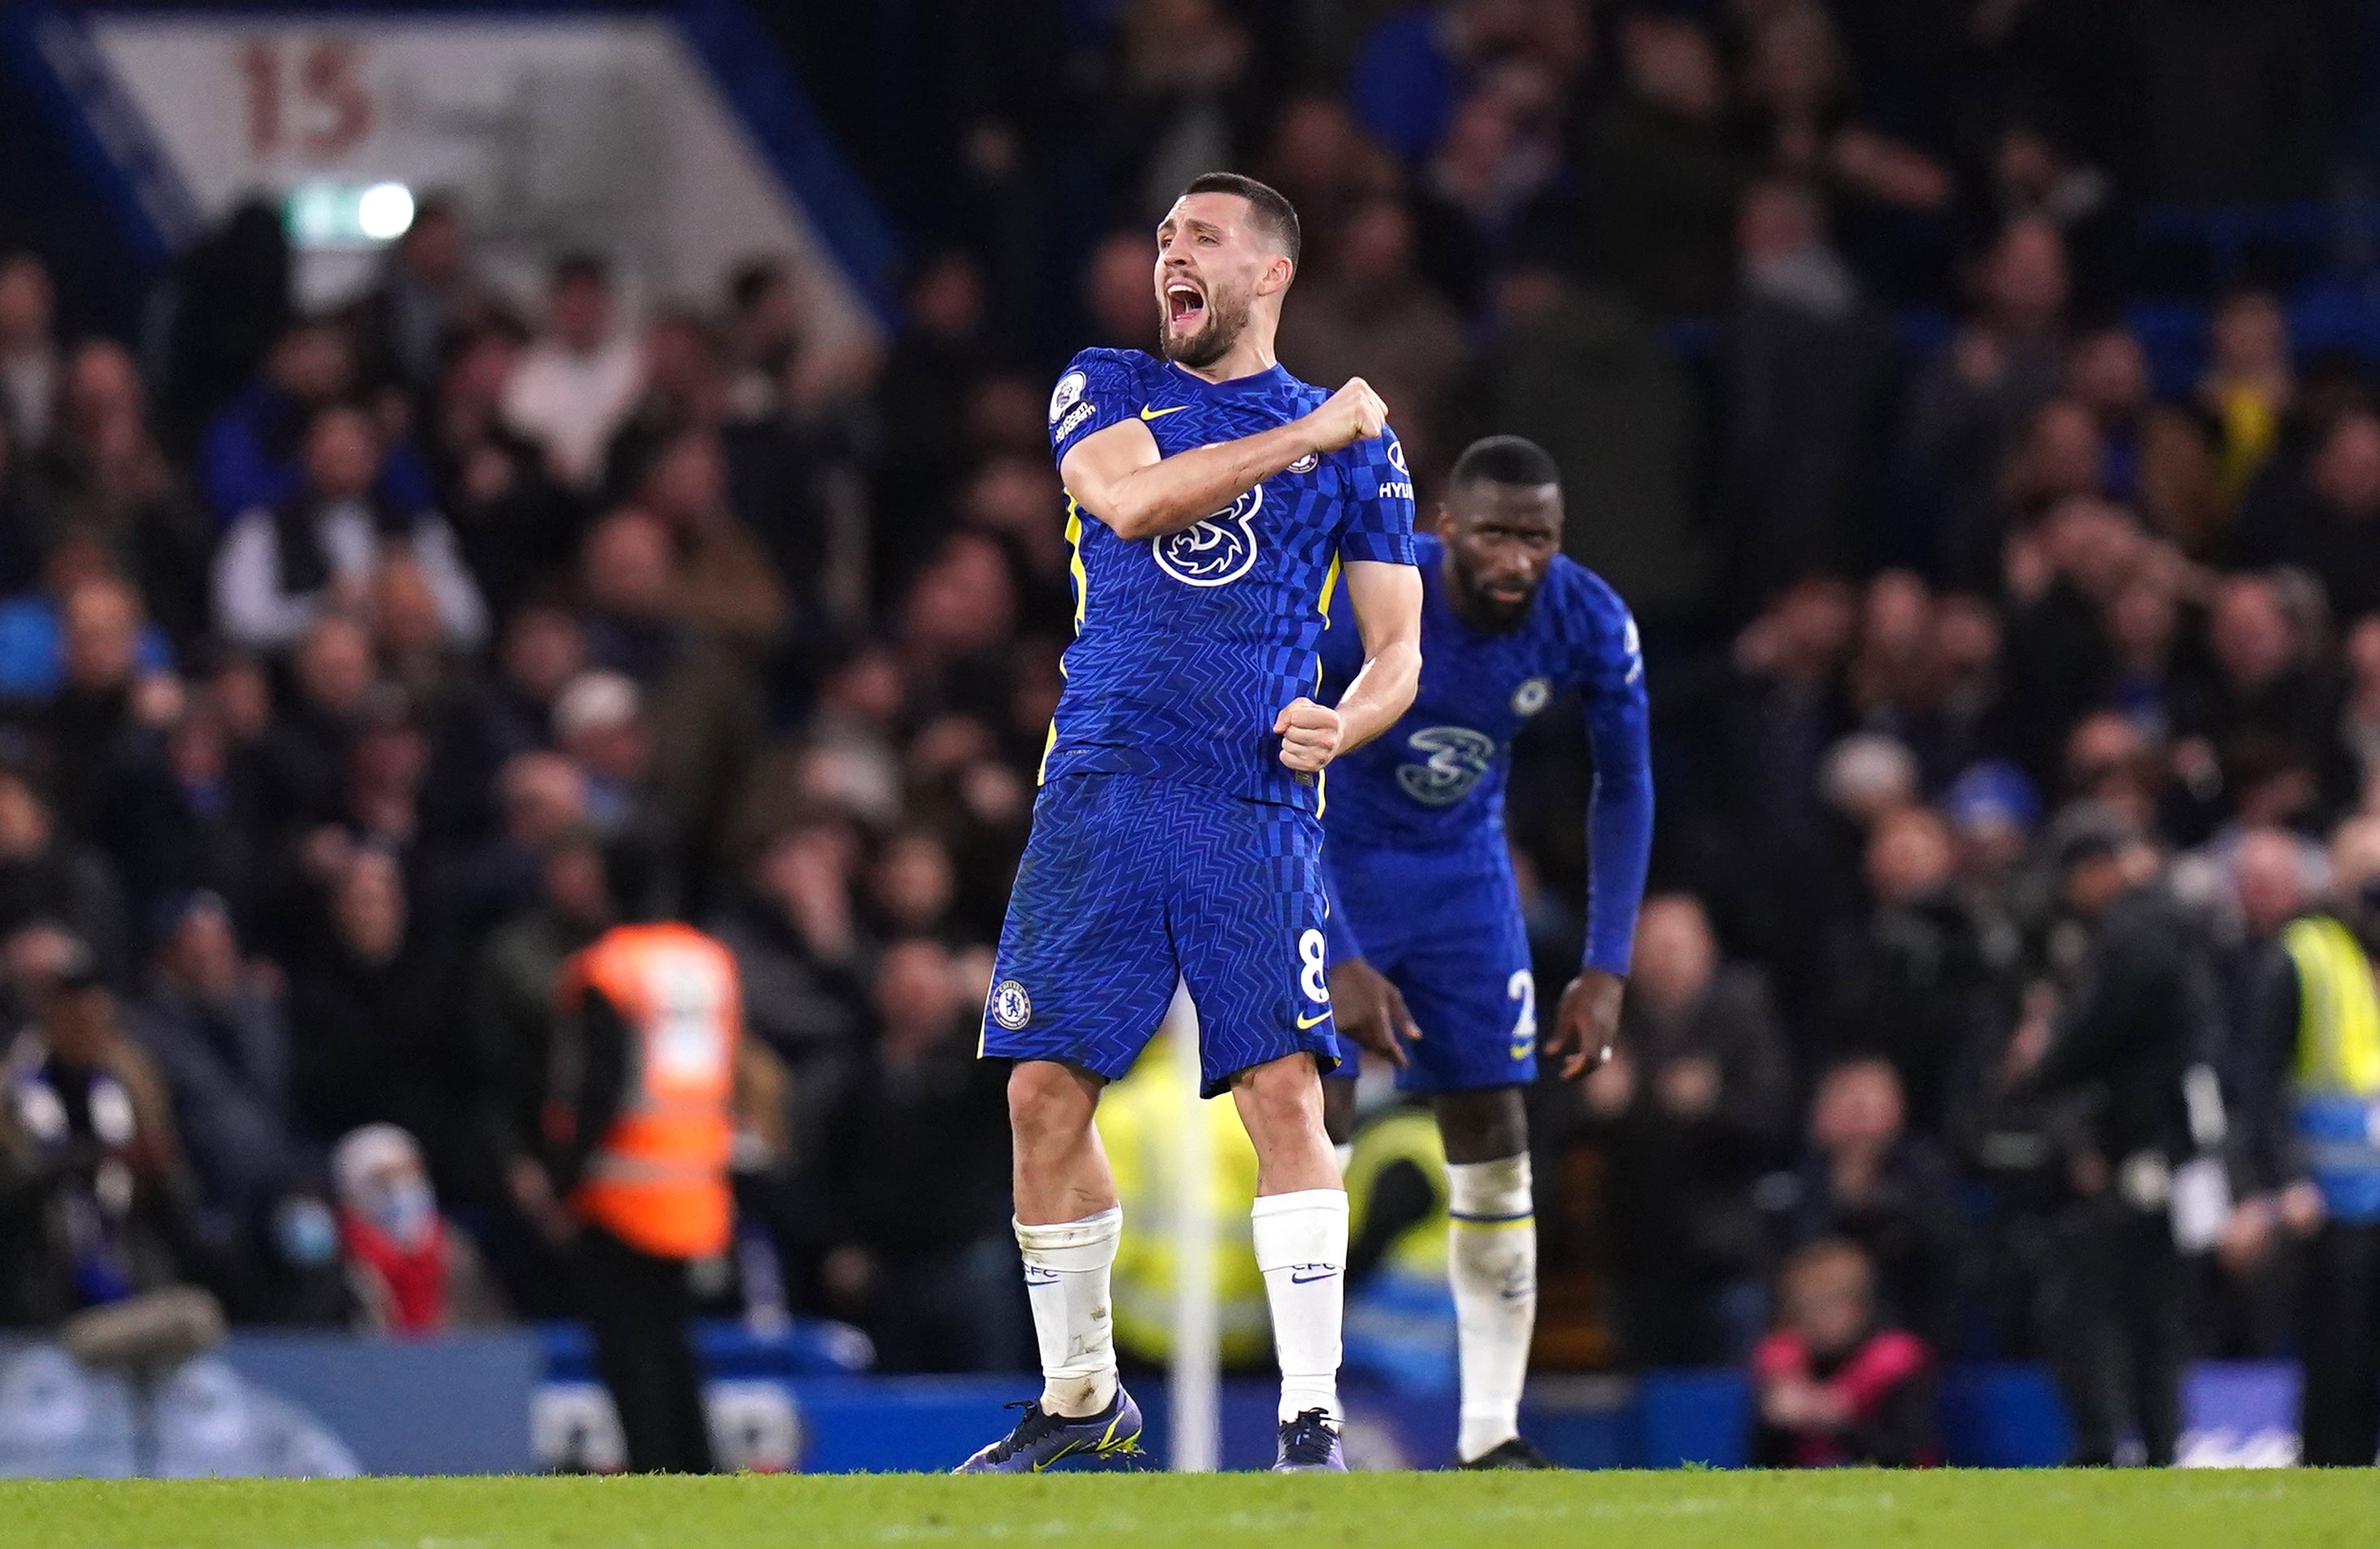 Mateo Kovacic (pictured) and Pulisic scored just before half-time to bring Chelsea level (Adam Davy/PA).